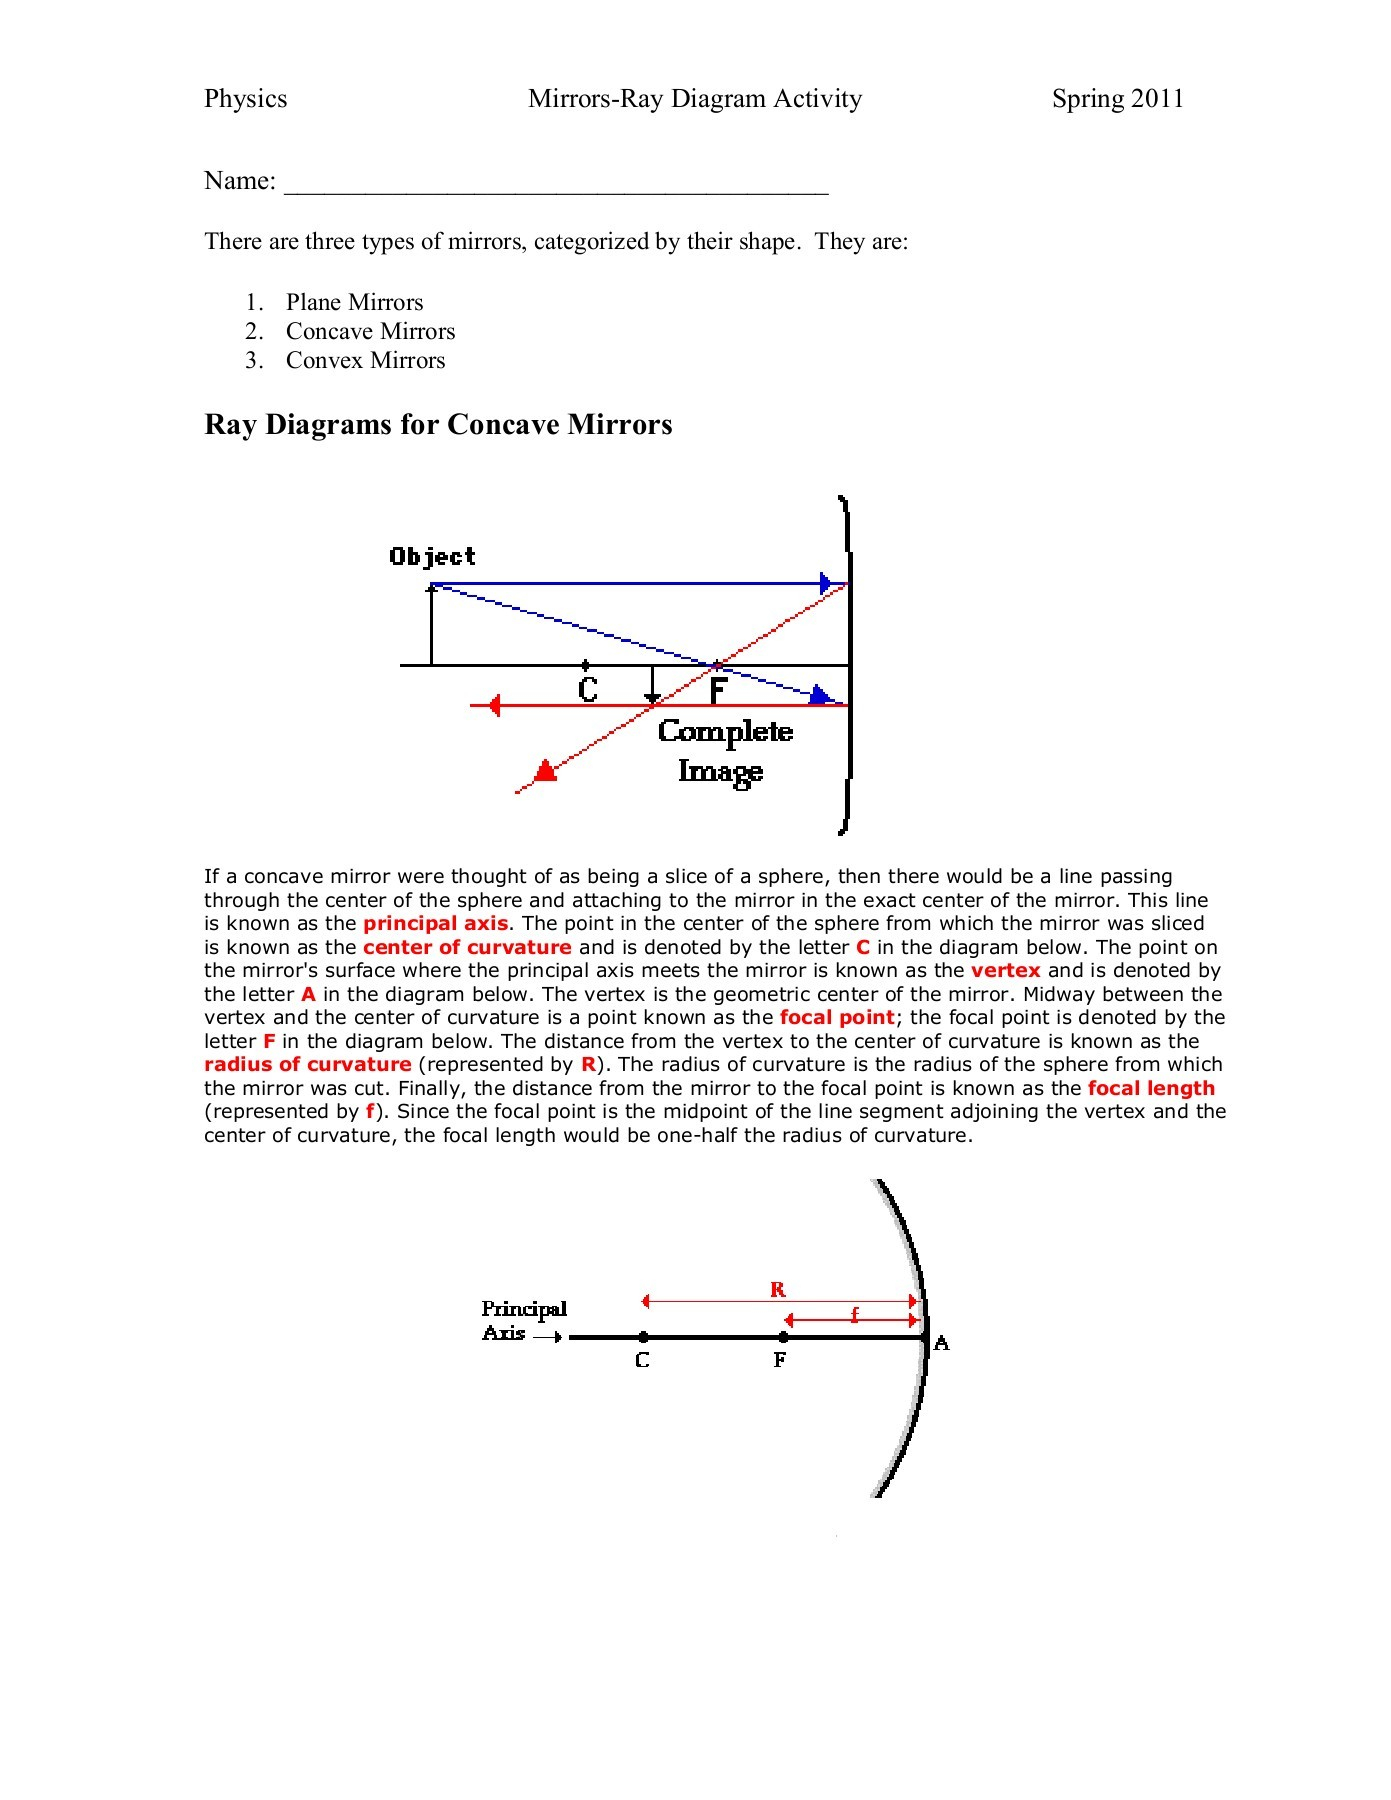 Convex Mirror Ray Diagram Ray Diagrams For Concave Mirrors Pages 1 16 Text Version Fliphtml5